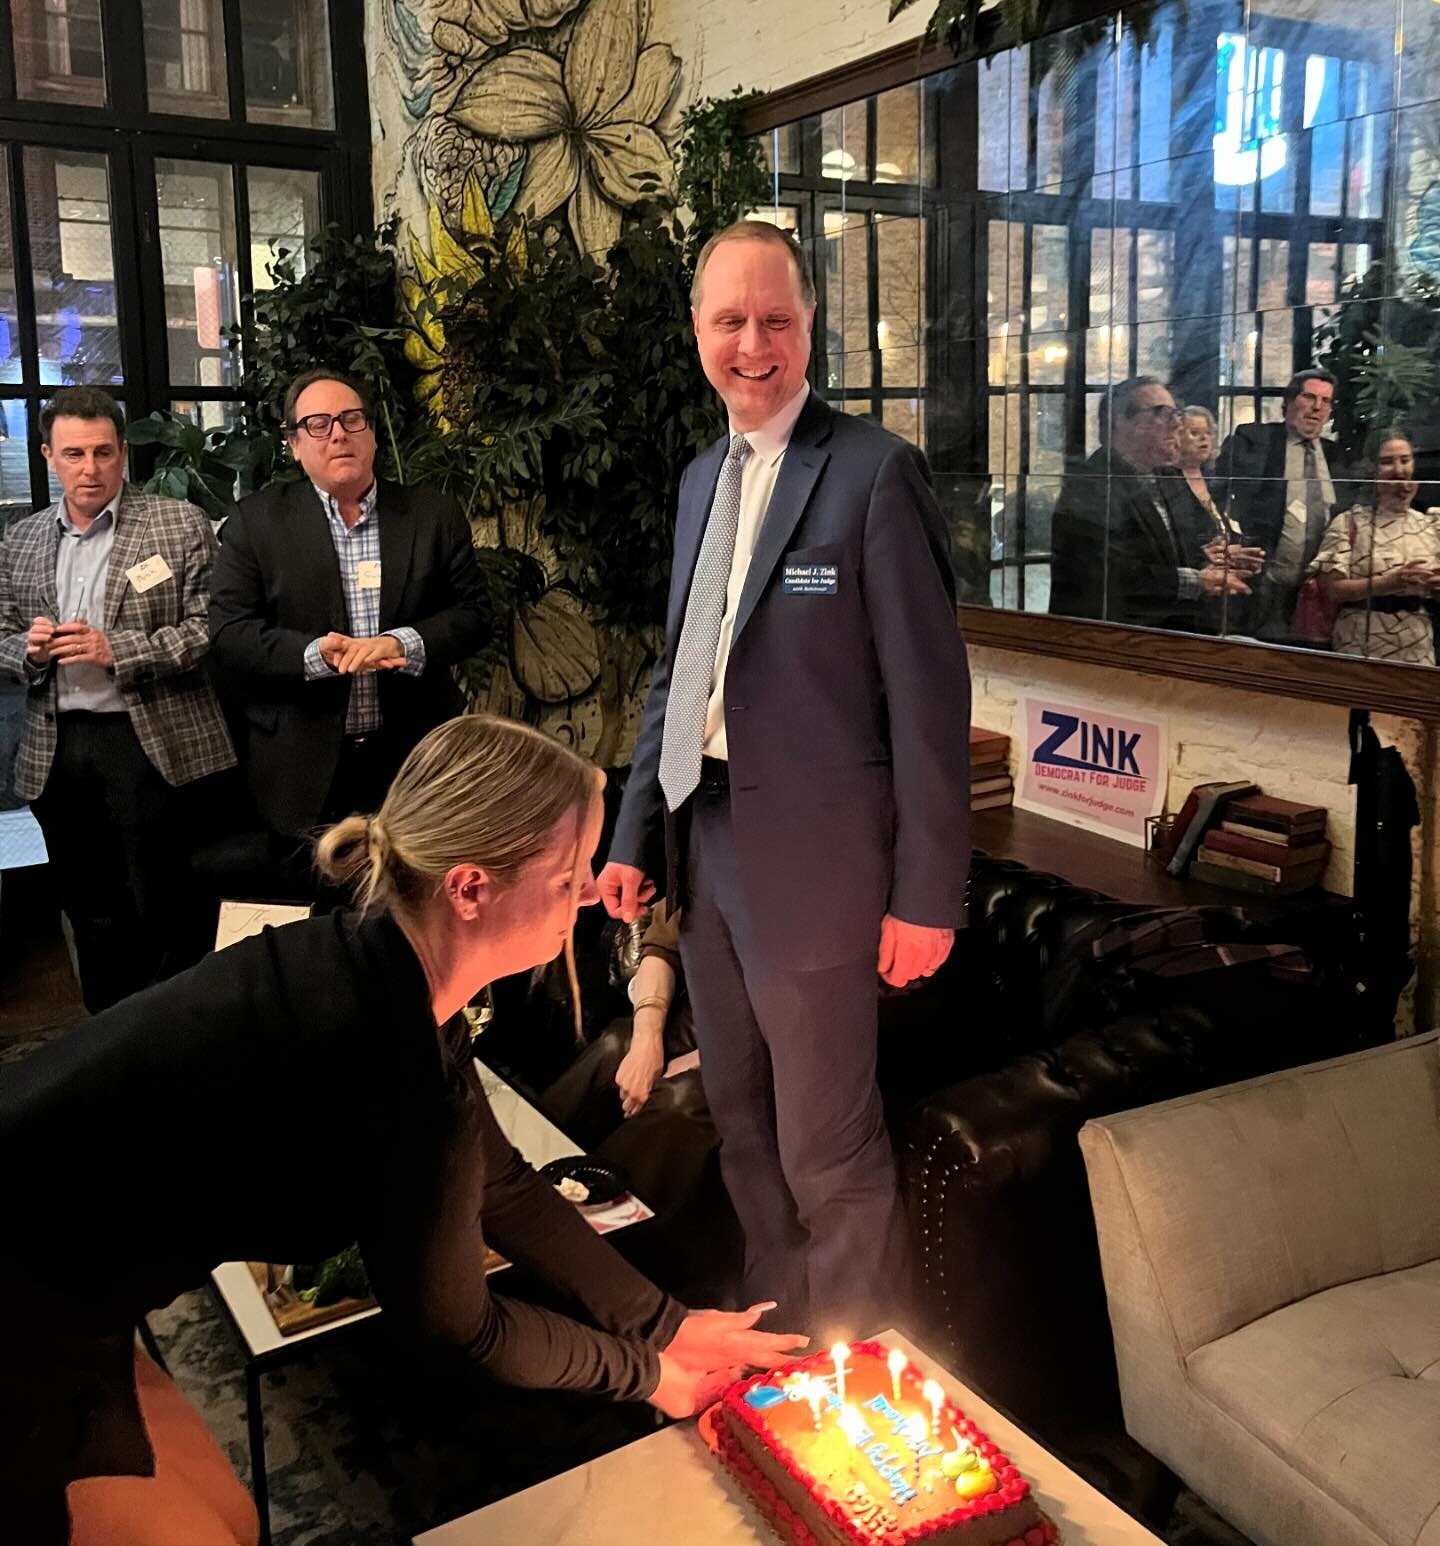 Thank you to everyone who came out for my early birthday party last week! As many of you know, my birthday falls on Election Day (Tuesday, March 19th) and the best gift I can imagine is the opportunity to serve my community as Judge of the 20th subci